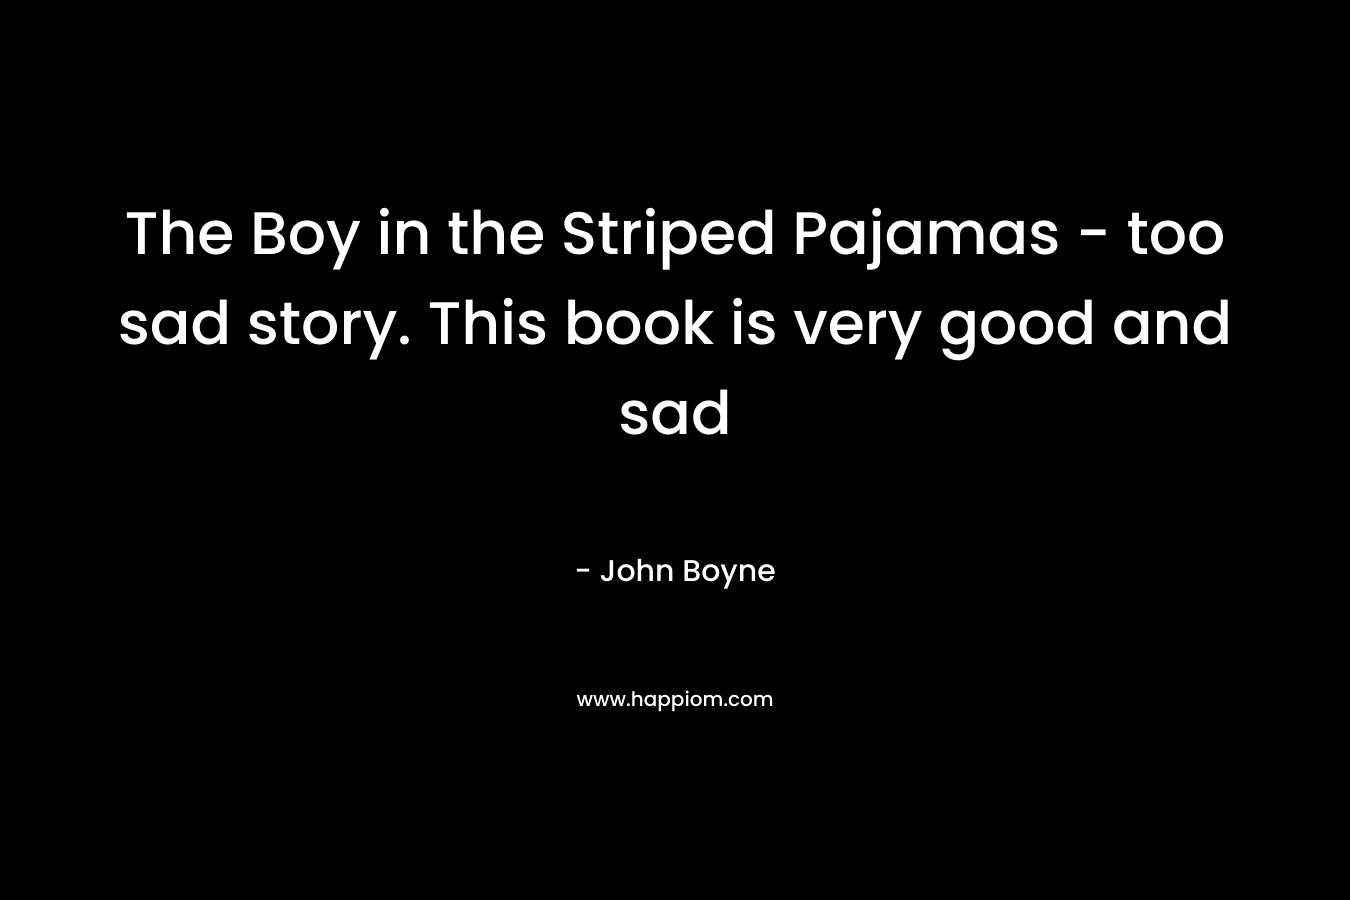 The Boy in the Striped Pajamas – too sad story. This book is very good and sad – John Boyne